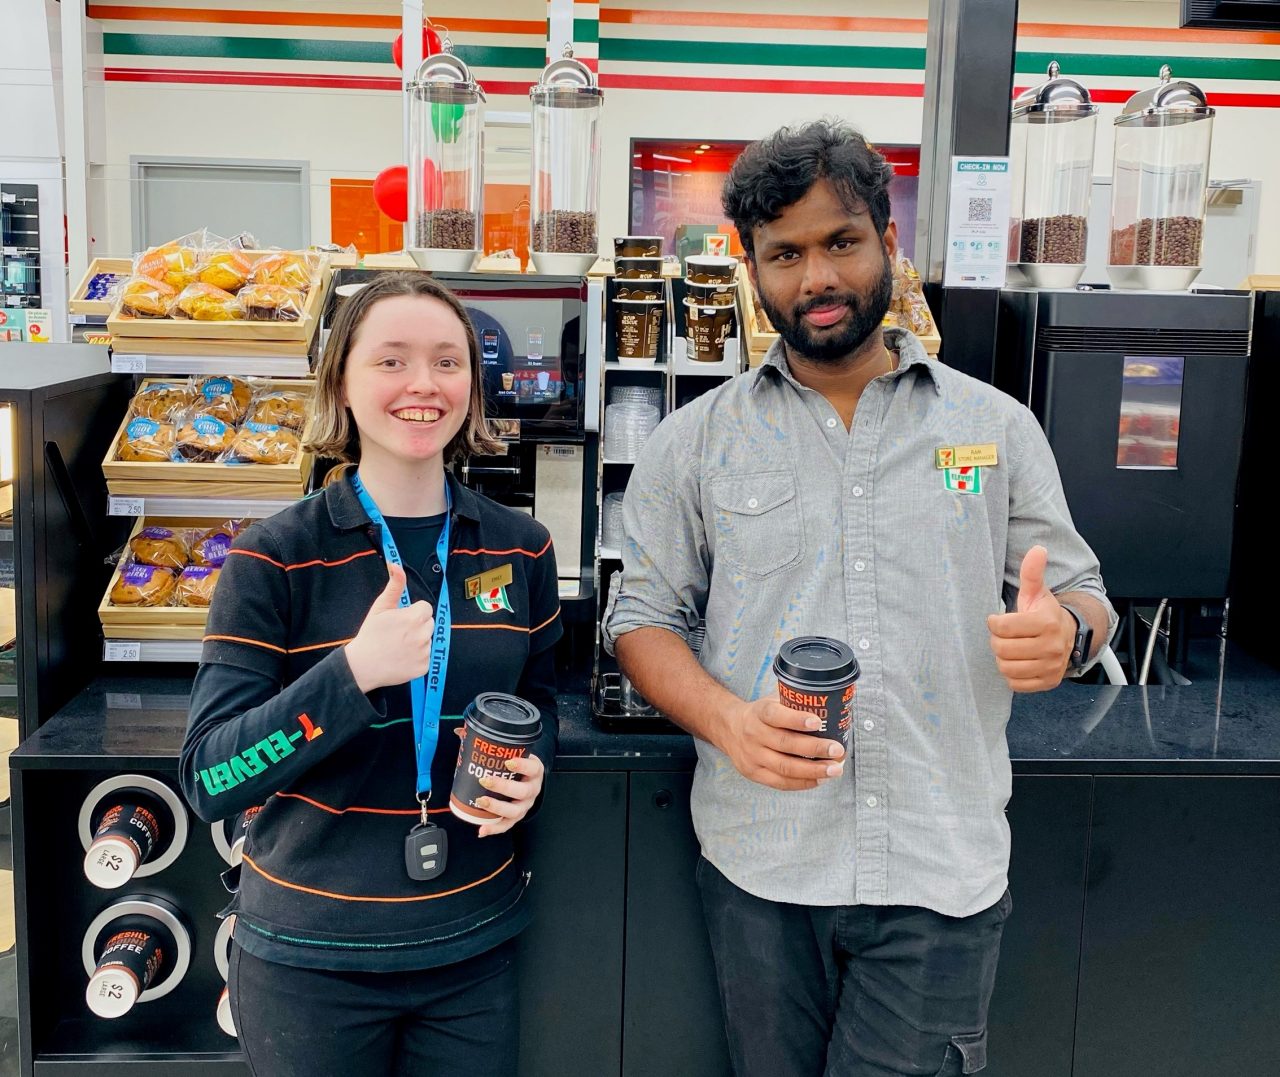 Emily and Ram from 7-Eleven Delacombe in their uniforms, smiling, in front of coffee machine.